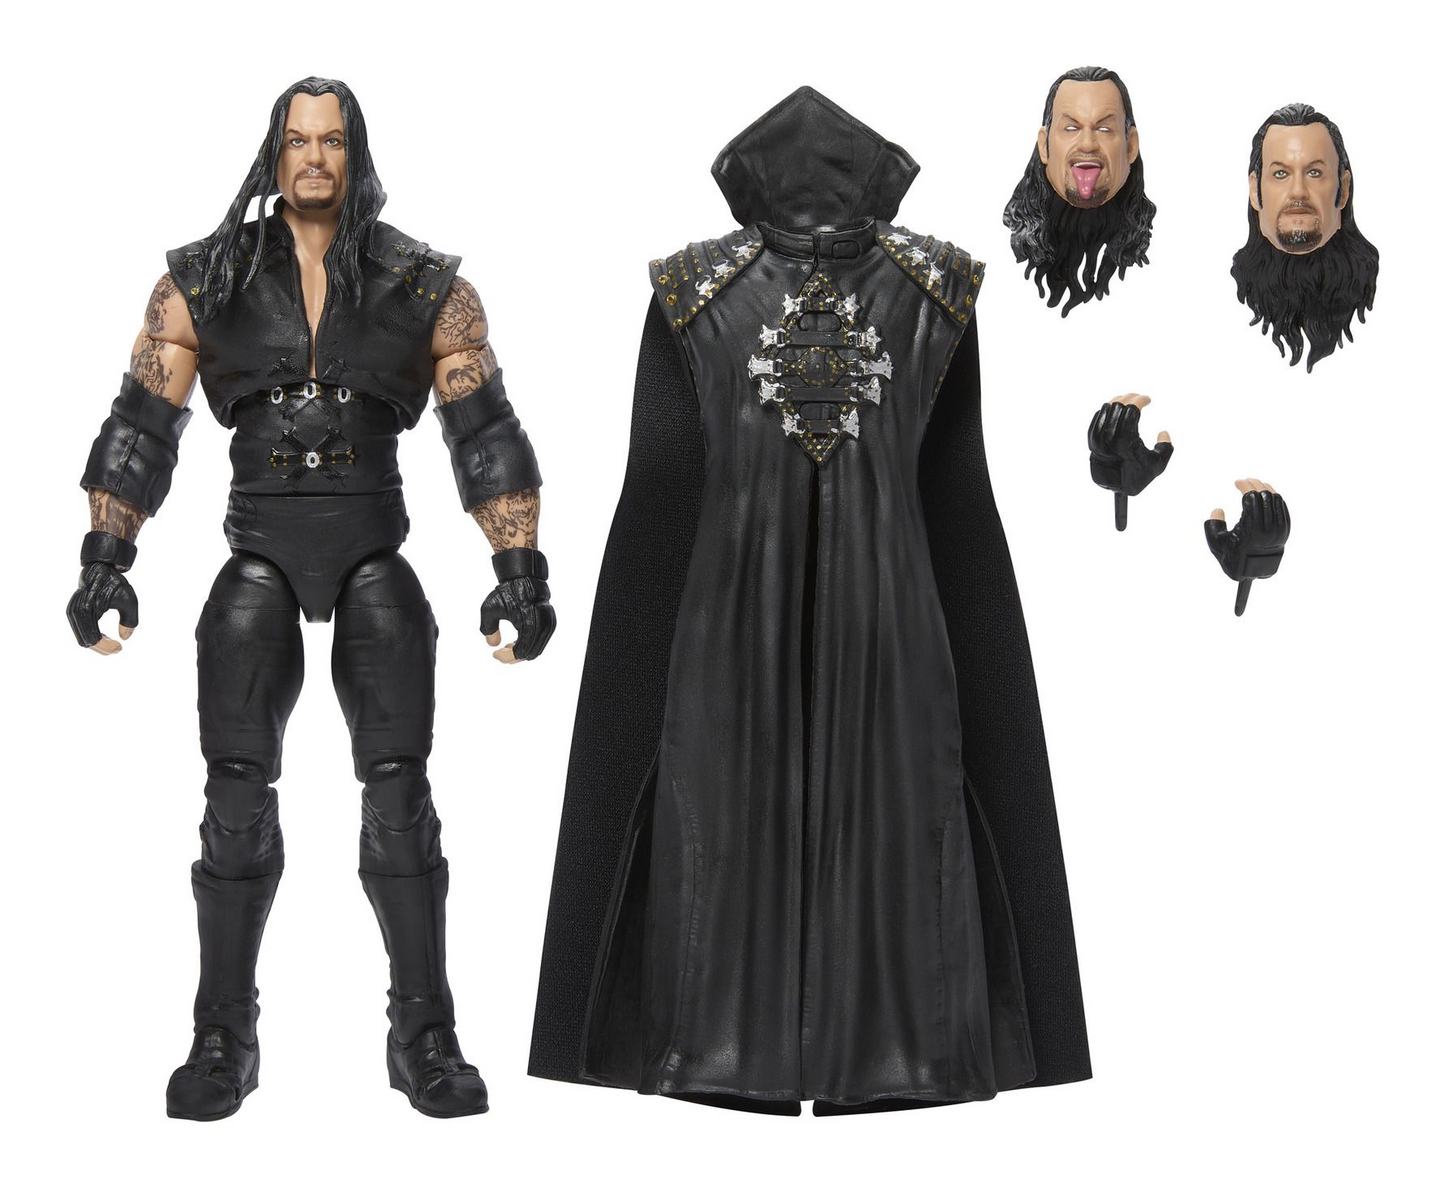 The Undertaker - WWE Ultimate Edition 20 Action Figure